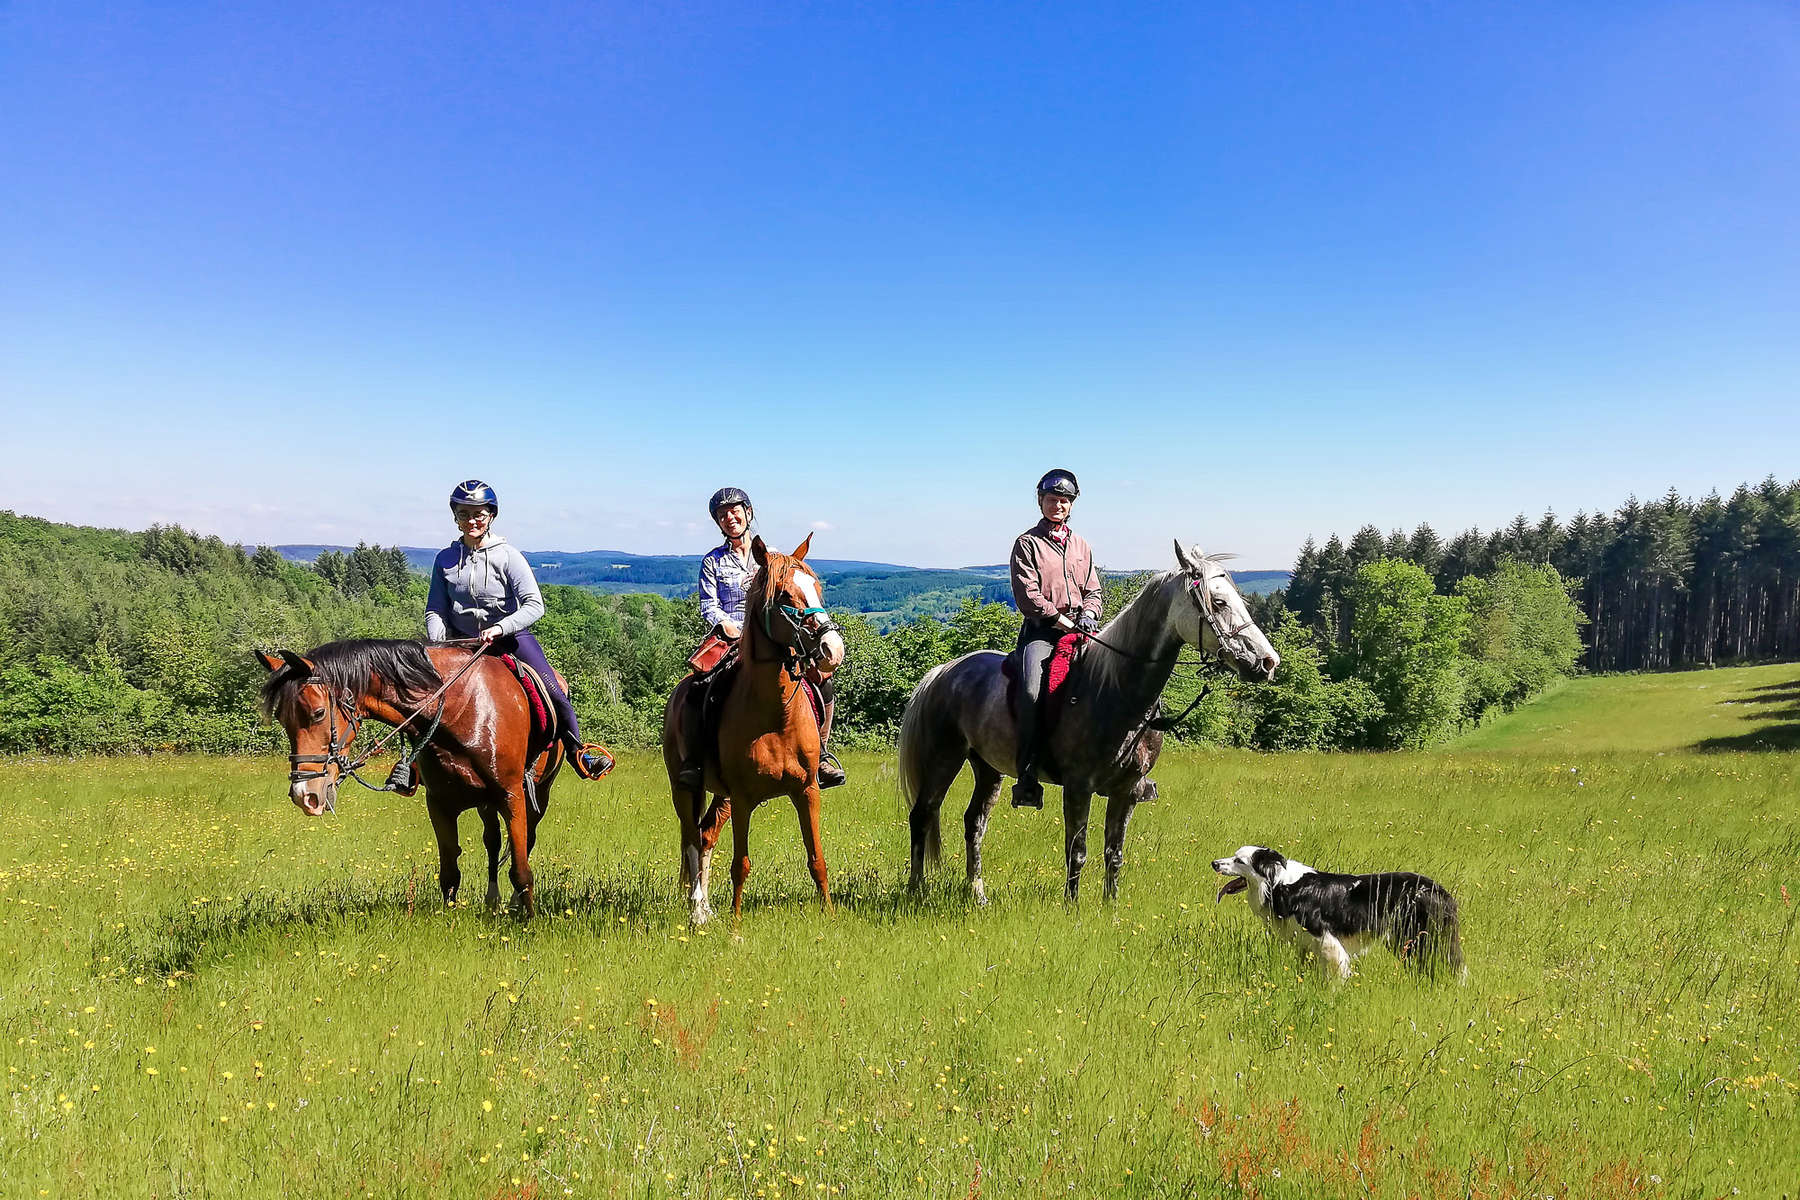 Trail riders in a field of flowers in Burgundy